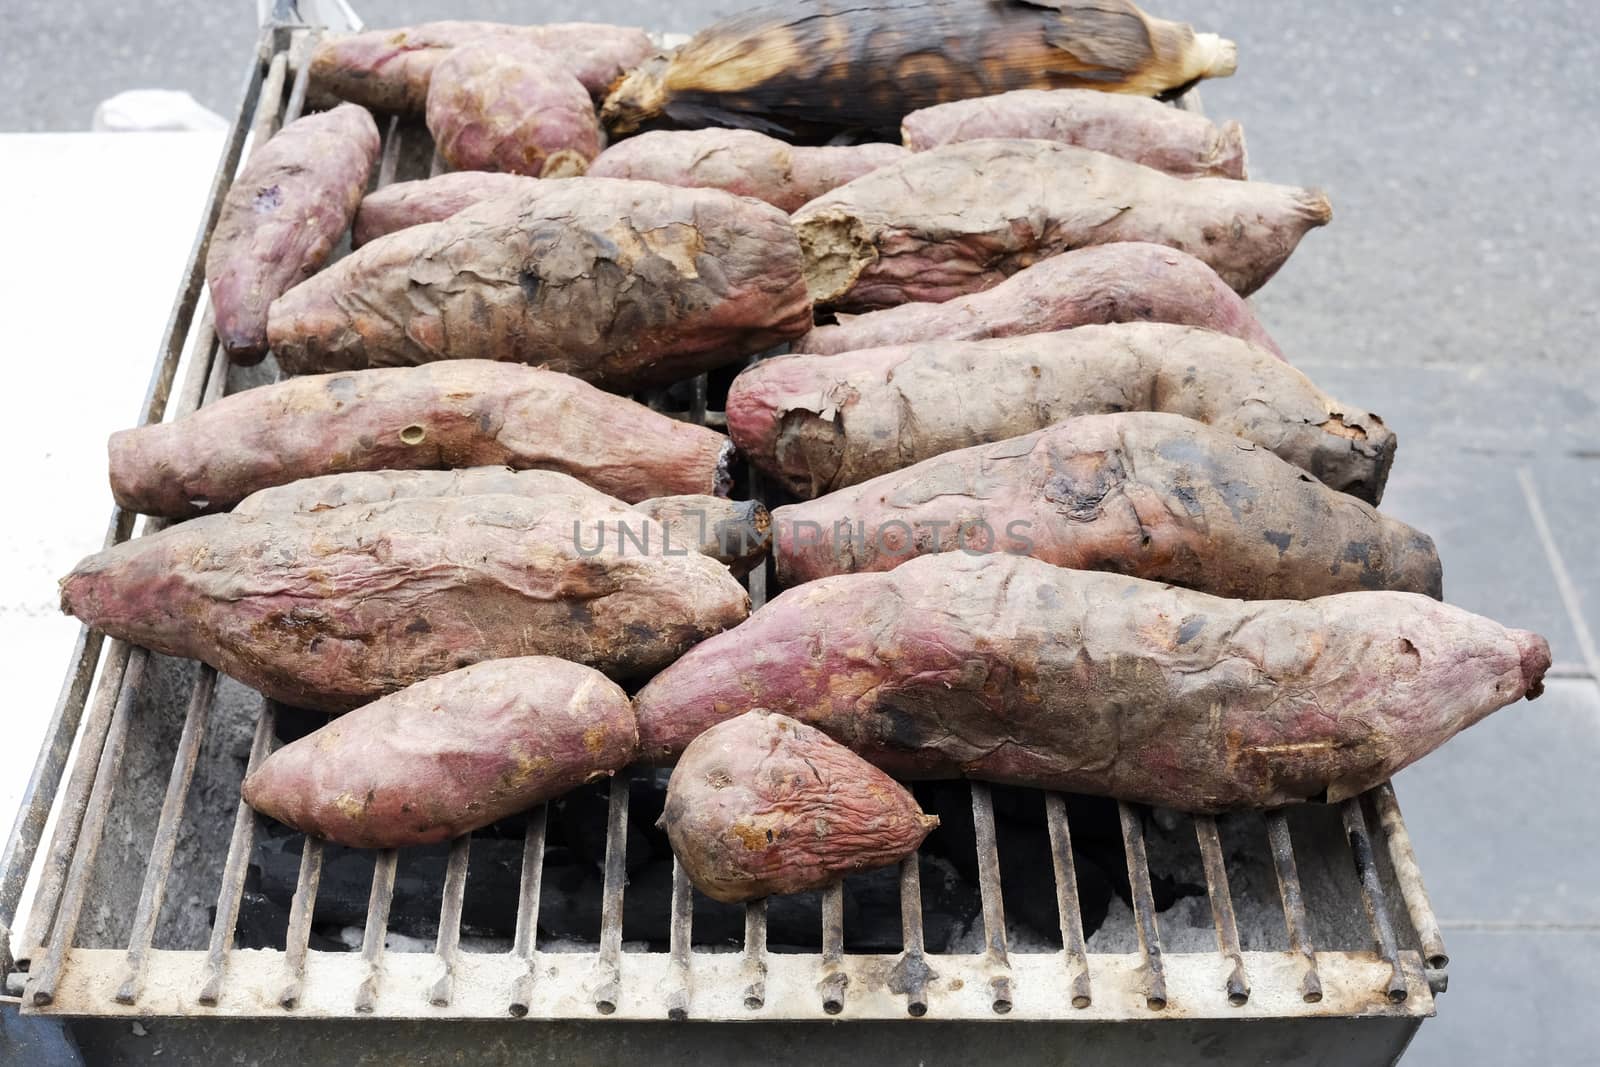 Sweet potato roasted just taken from the gridiron.